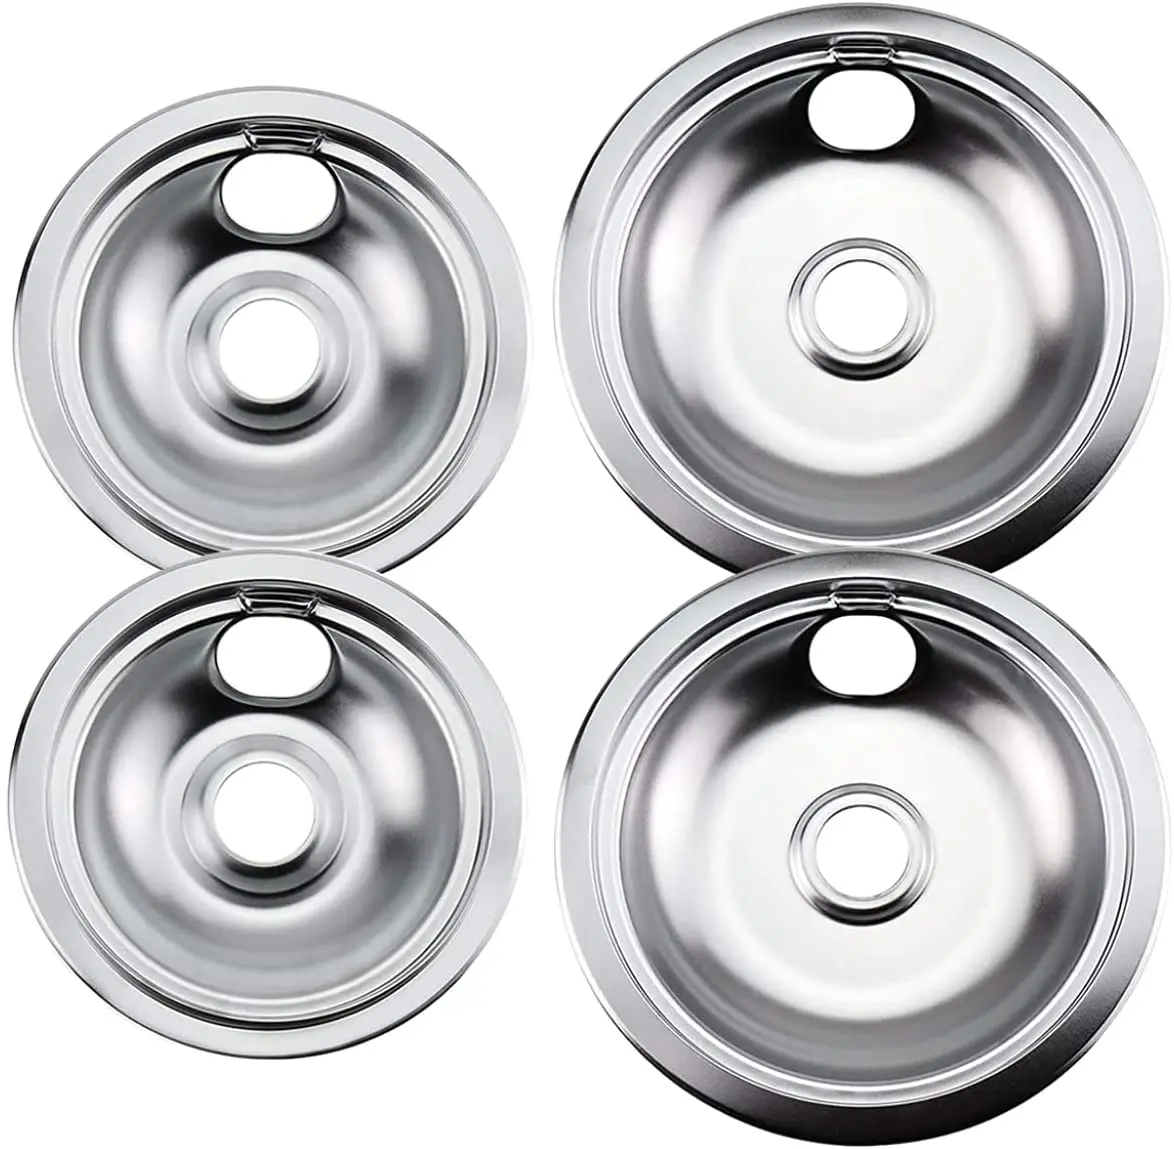 4 Pack Stainless Steel Reflector Bowls Universal Drip Pan Kits Gas Stove Burner Rings for Frigidaire Kenmore 5304430150